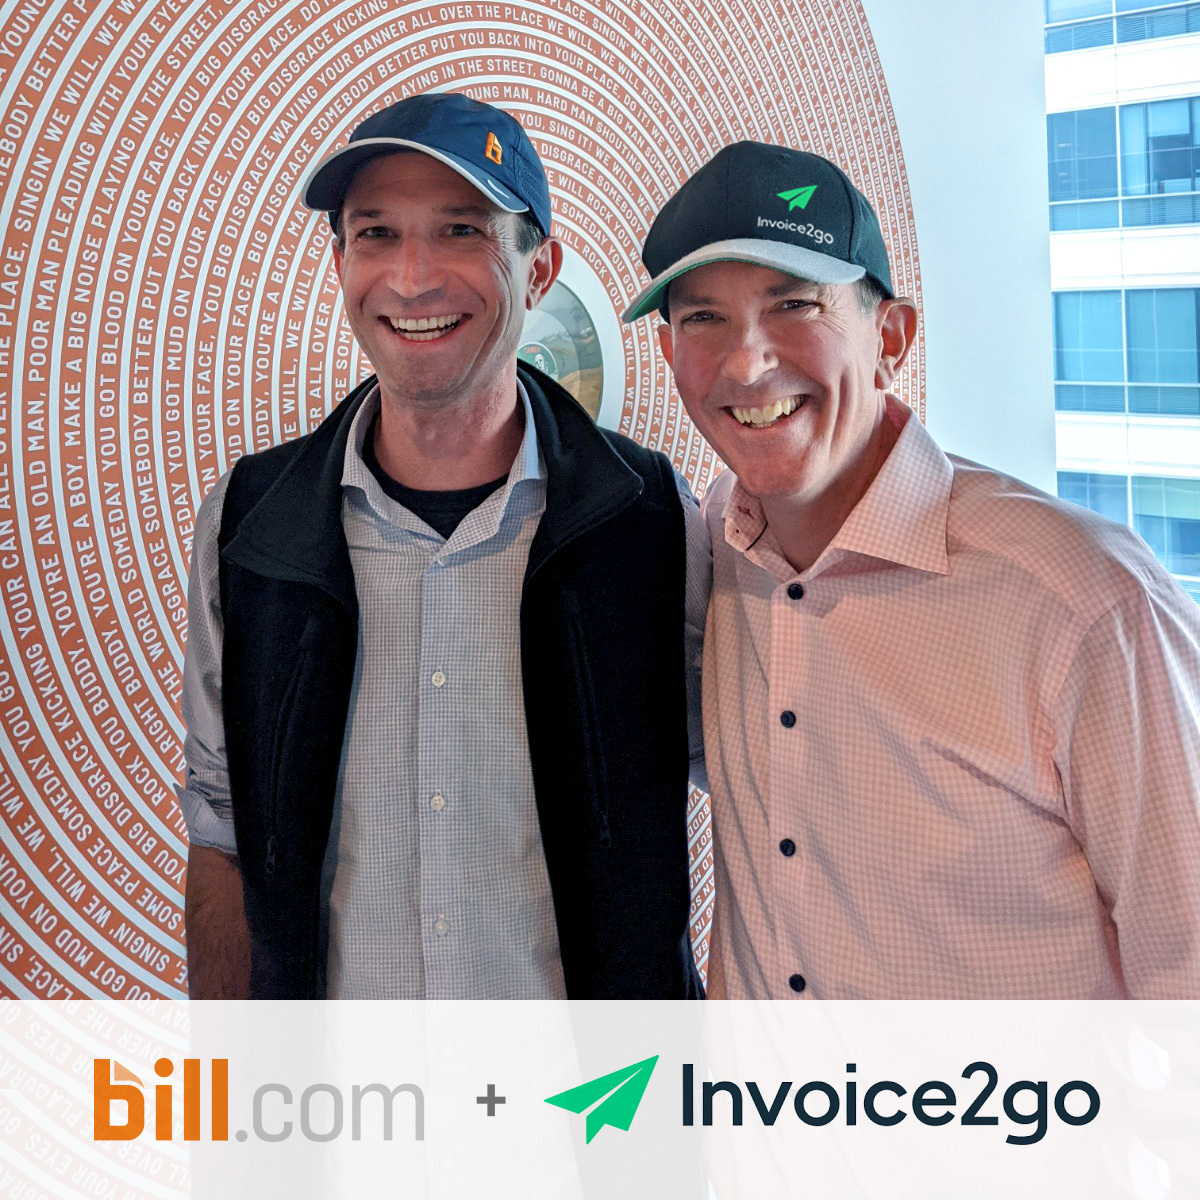 Enjoyed having @MTLenhard and the @invoice2go team at Bill.com HQ today. Was great to connect with the team. Looking forward to working with the team once we close!